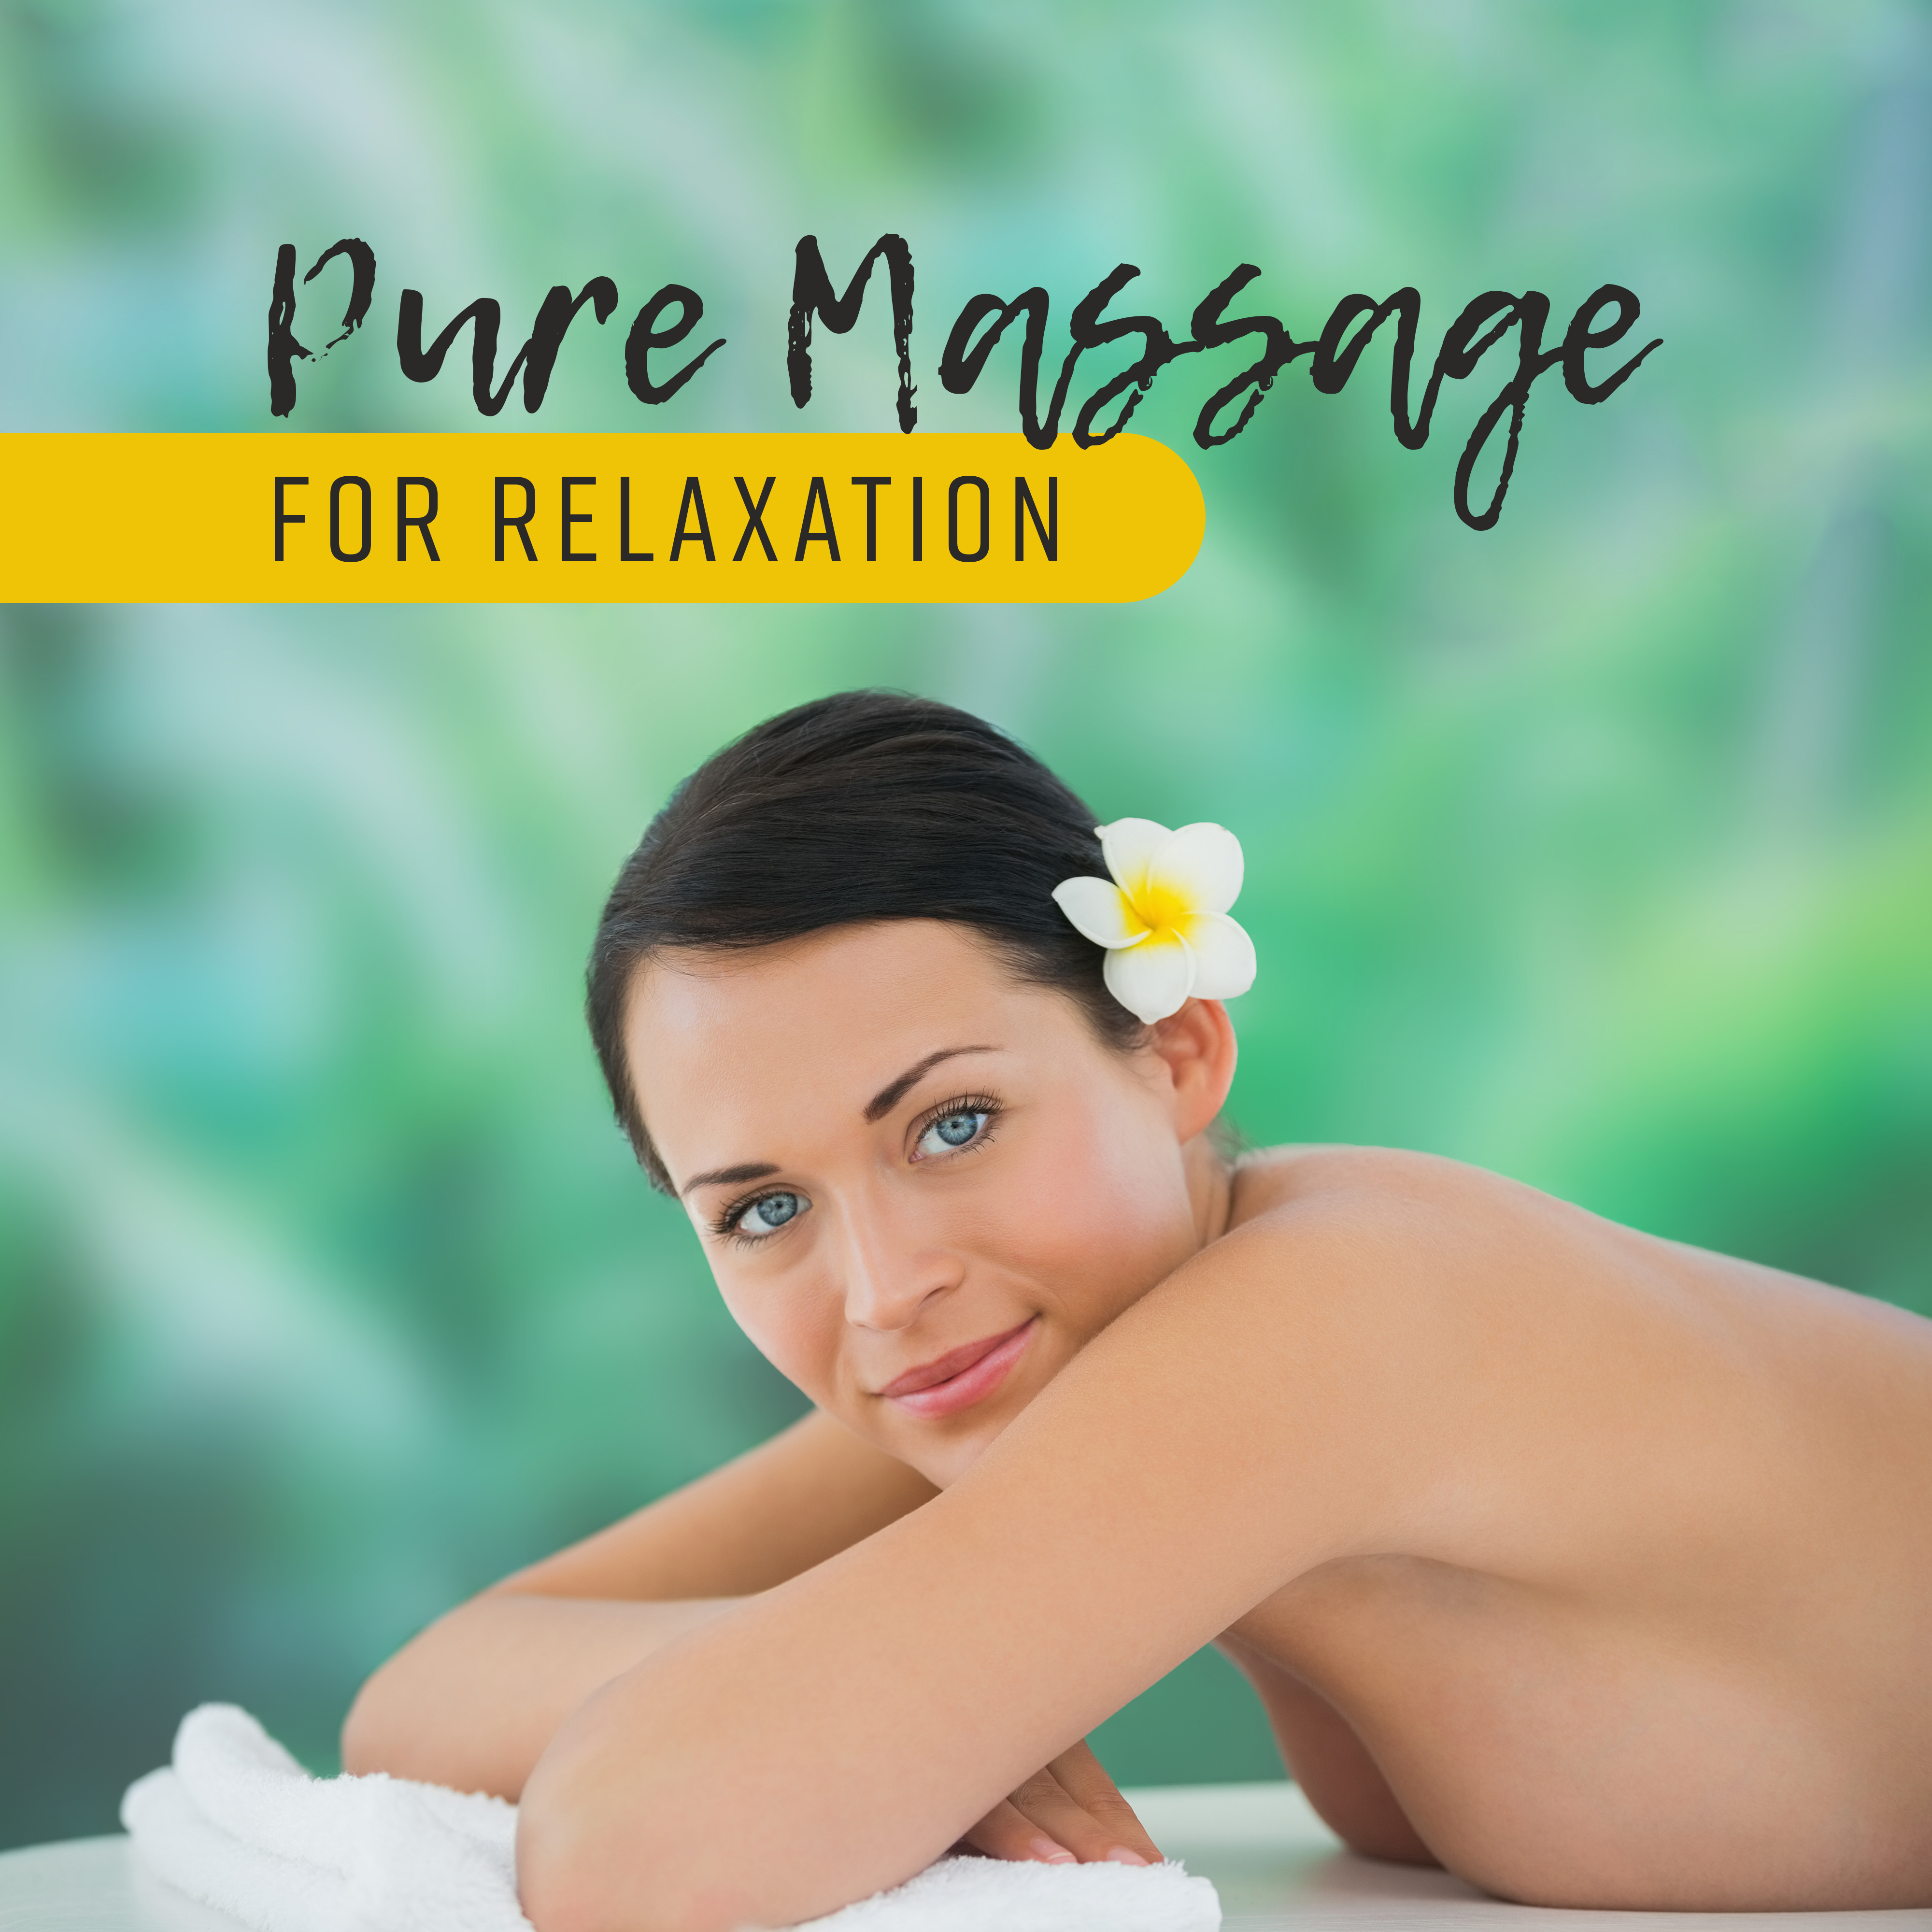 Pure Massage for Relaxation